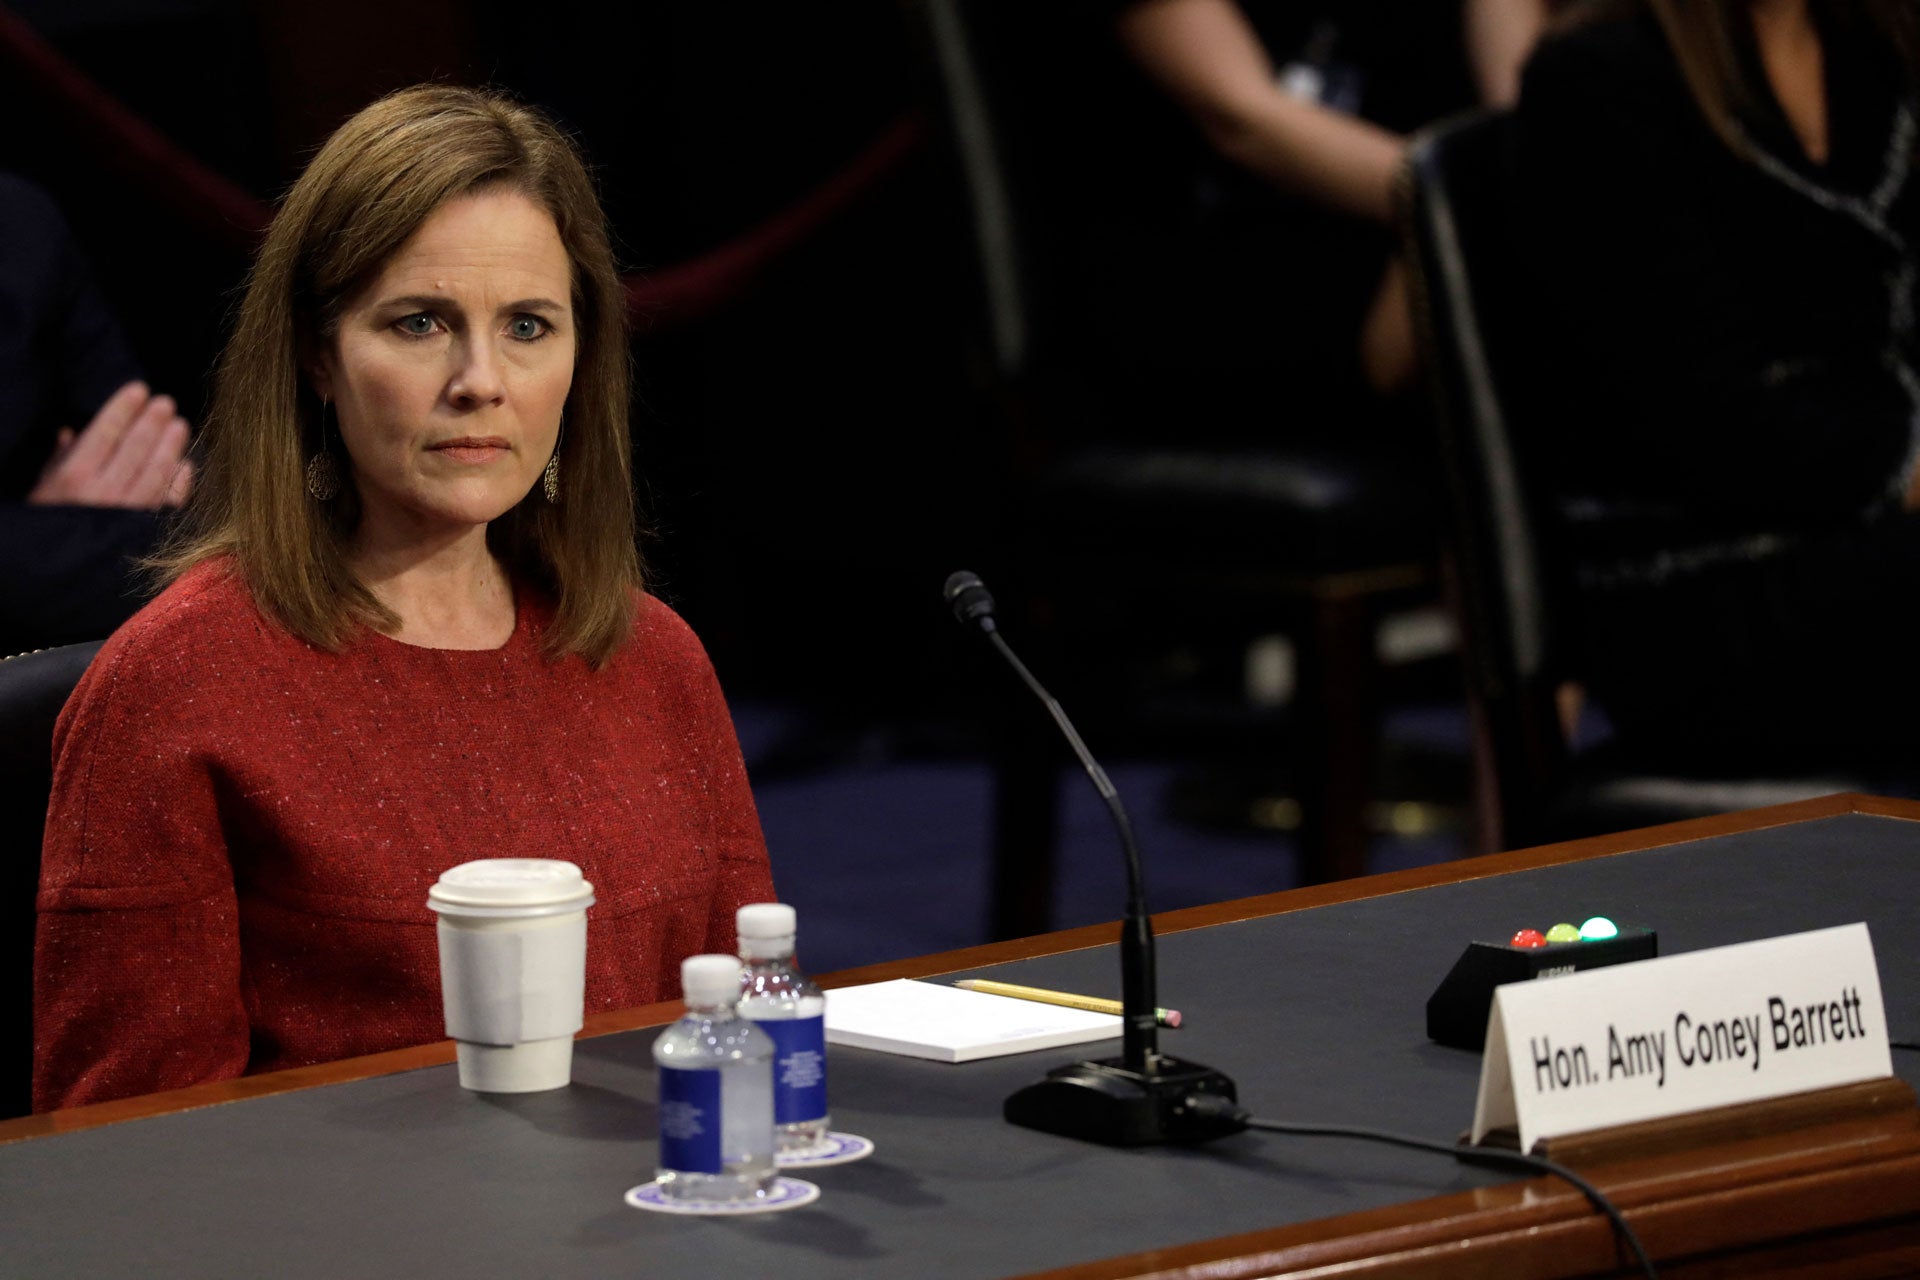 US Supreme Court nominee Judge Amy Coney Barrett testifies during the second day of her confirmation hearing before the Senate Judiciary Committee on Capitol Hill in Washington, October 13, 2020. 